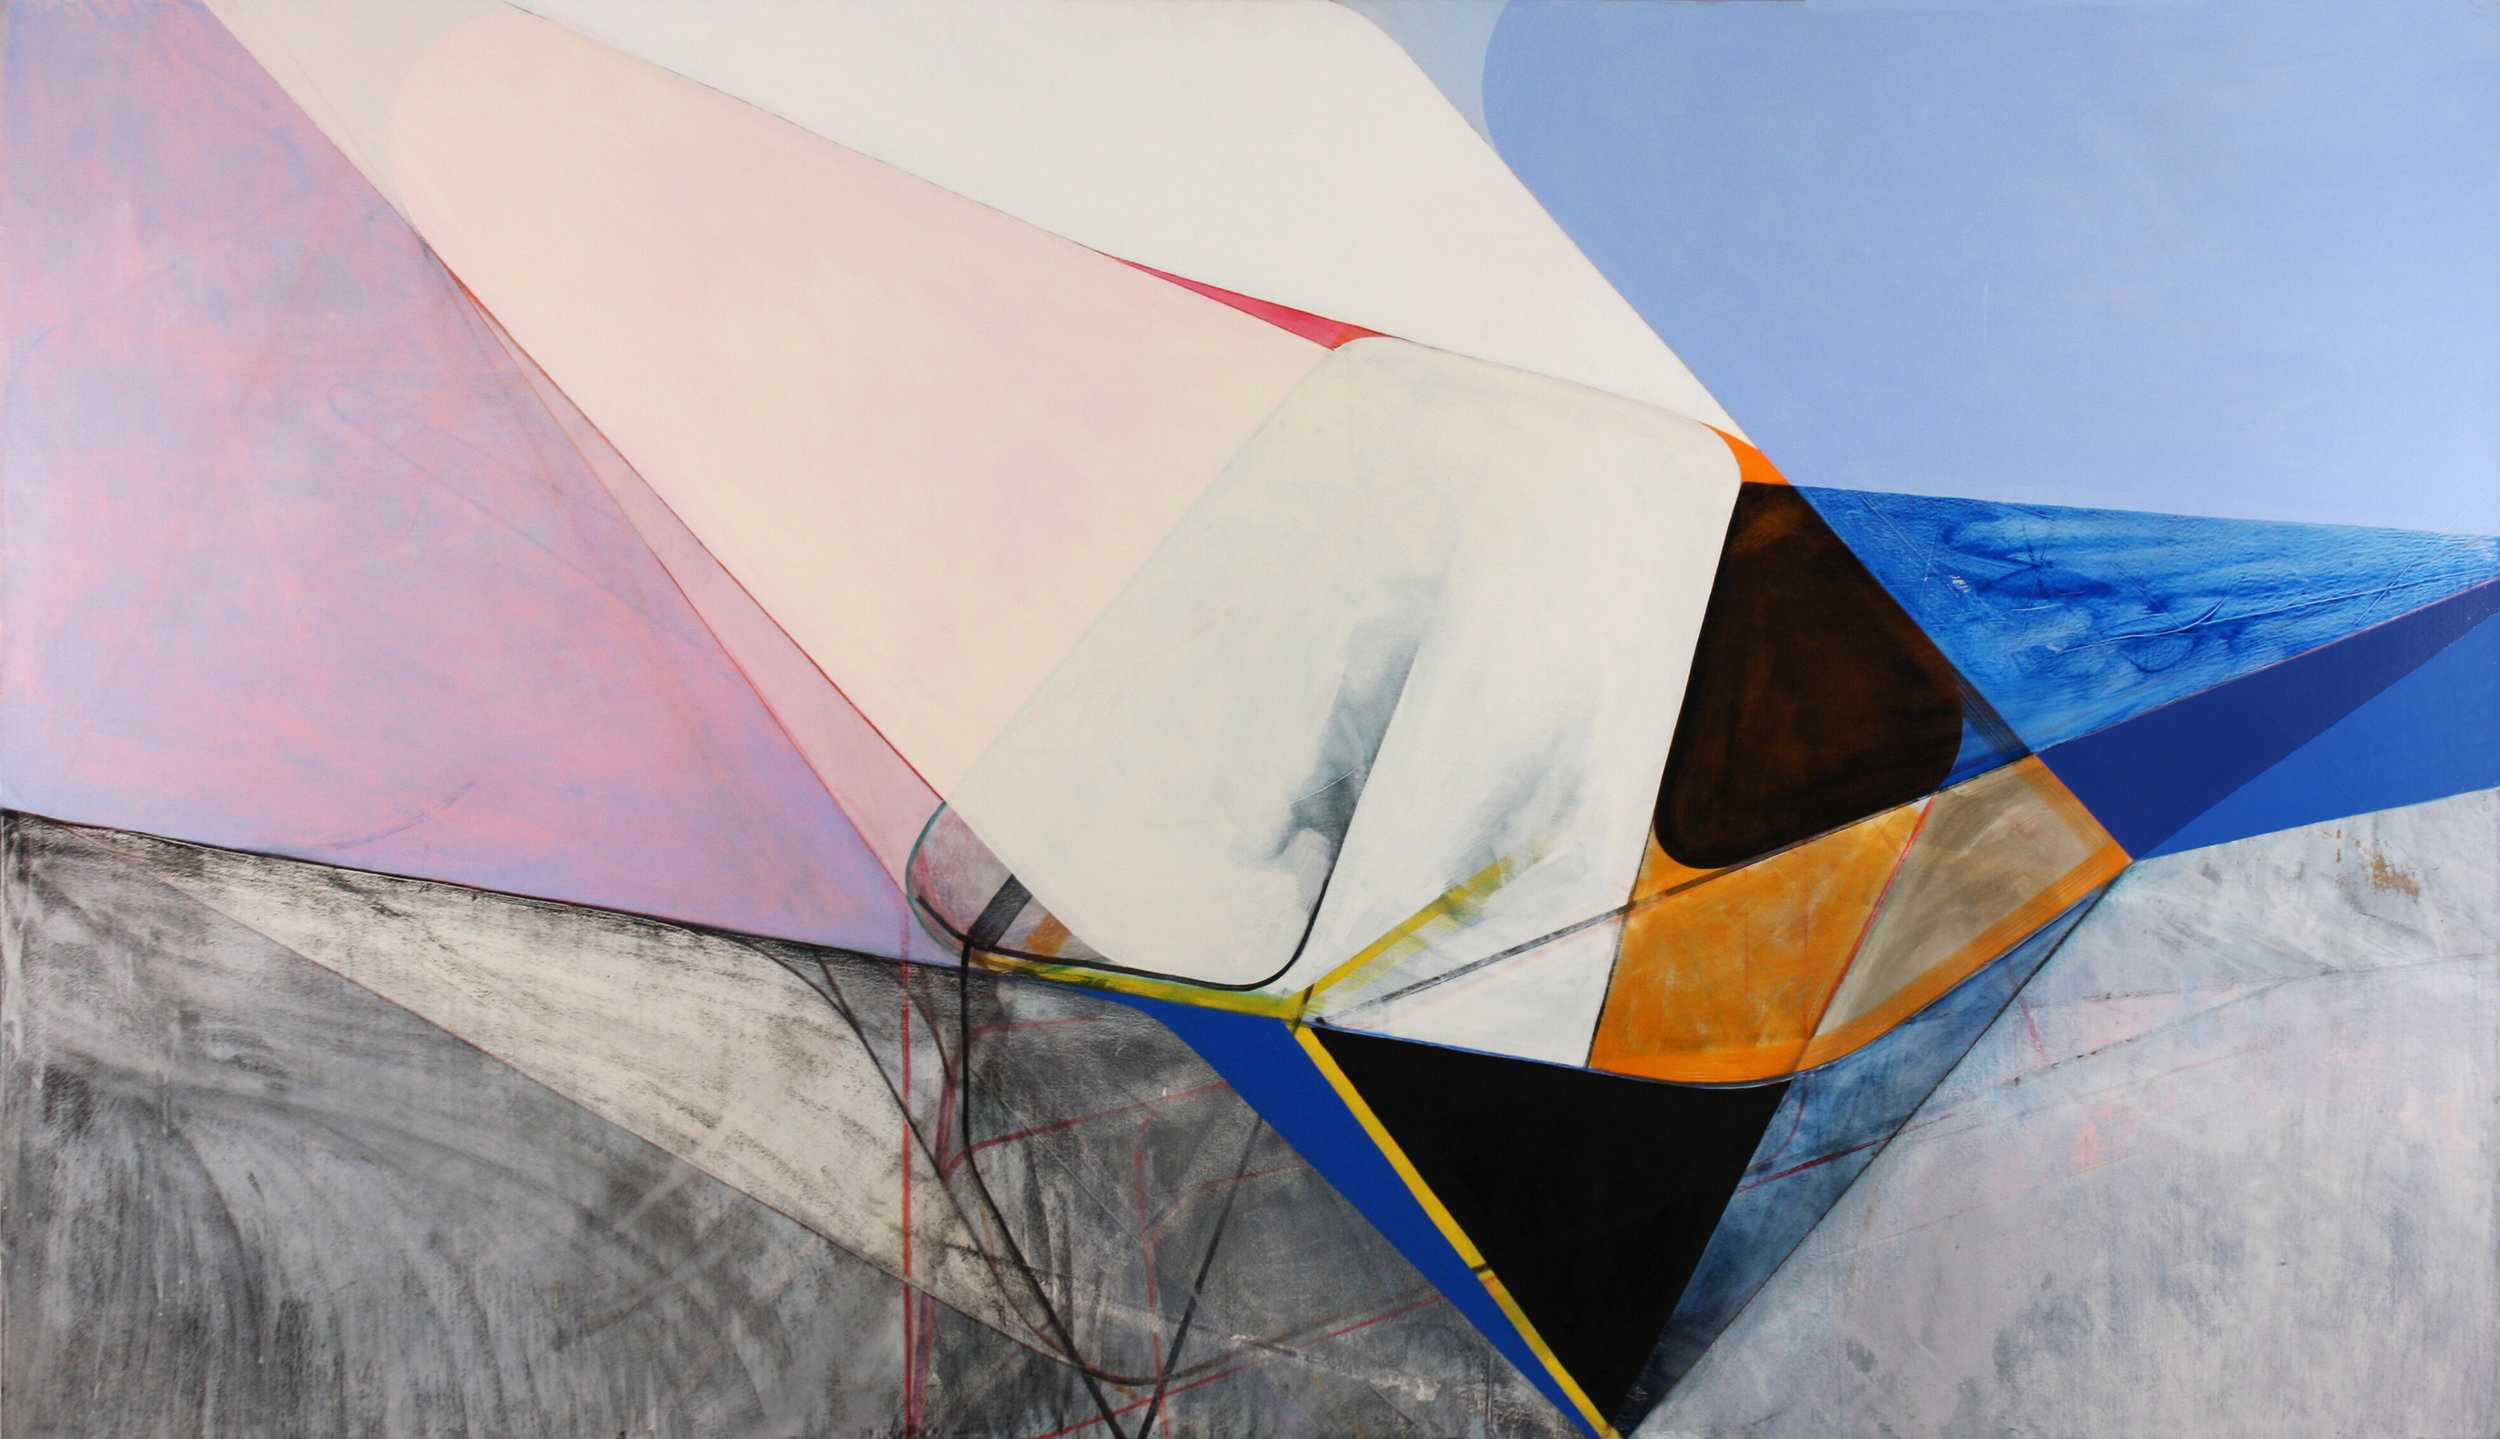   Nick Lamia  (b. 1971)  Untitled , 2016 Oil on canvas 48 x 84 inches 121.9 x 213.4 cm 